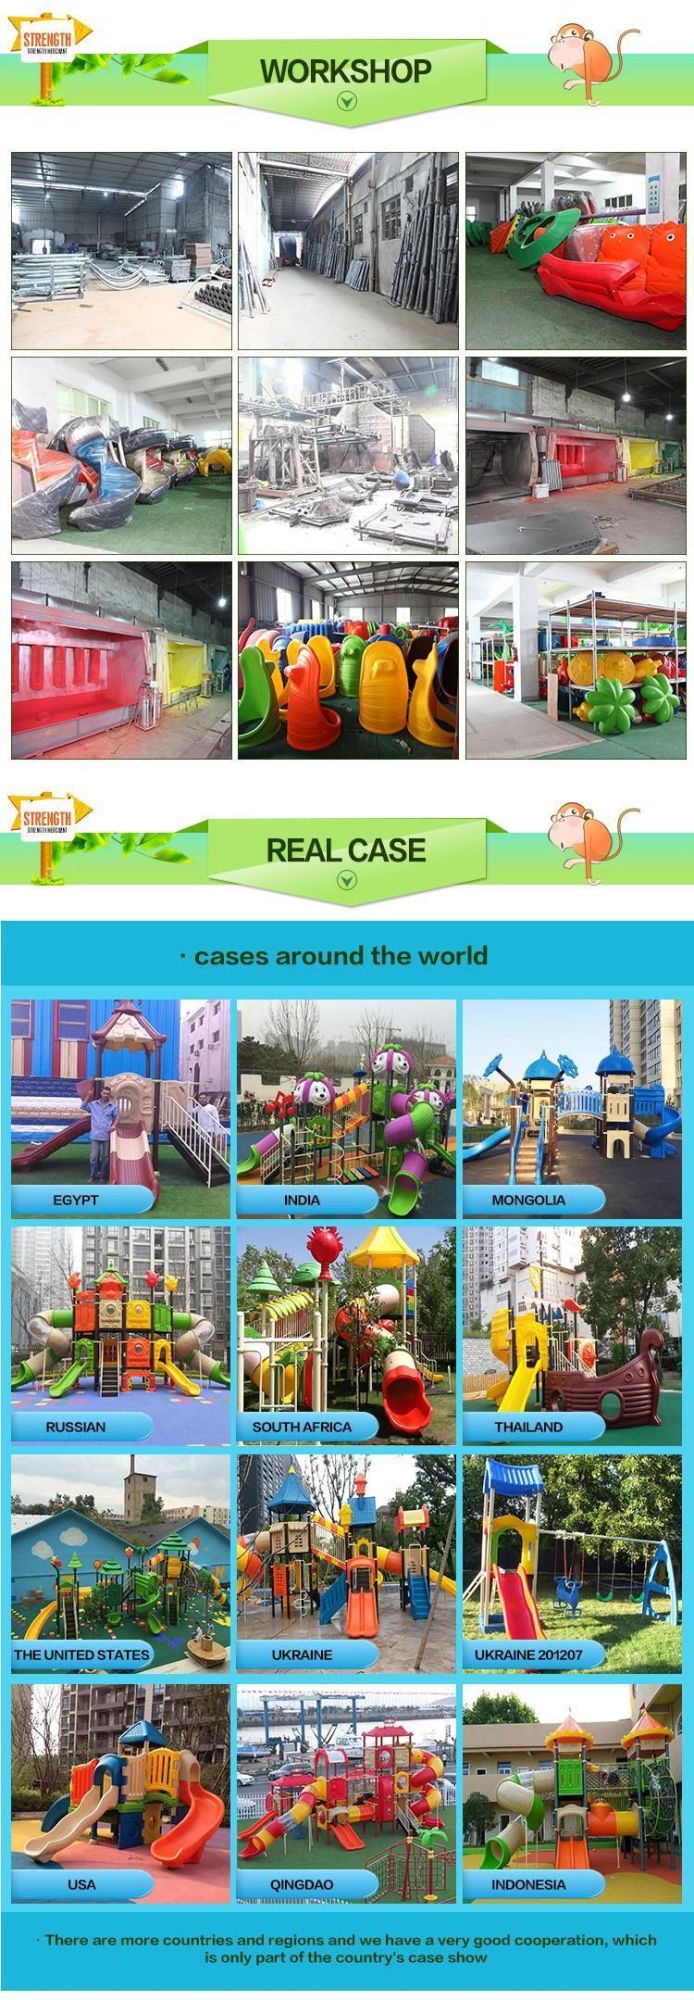 New High-Quality Playground Equipment Slide for Outdoor